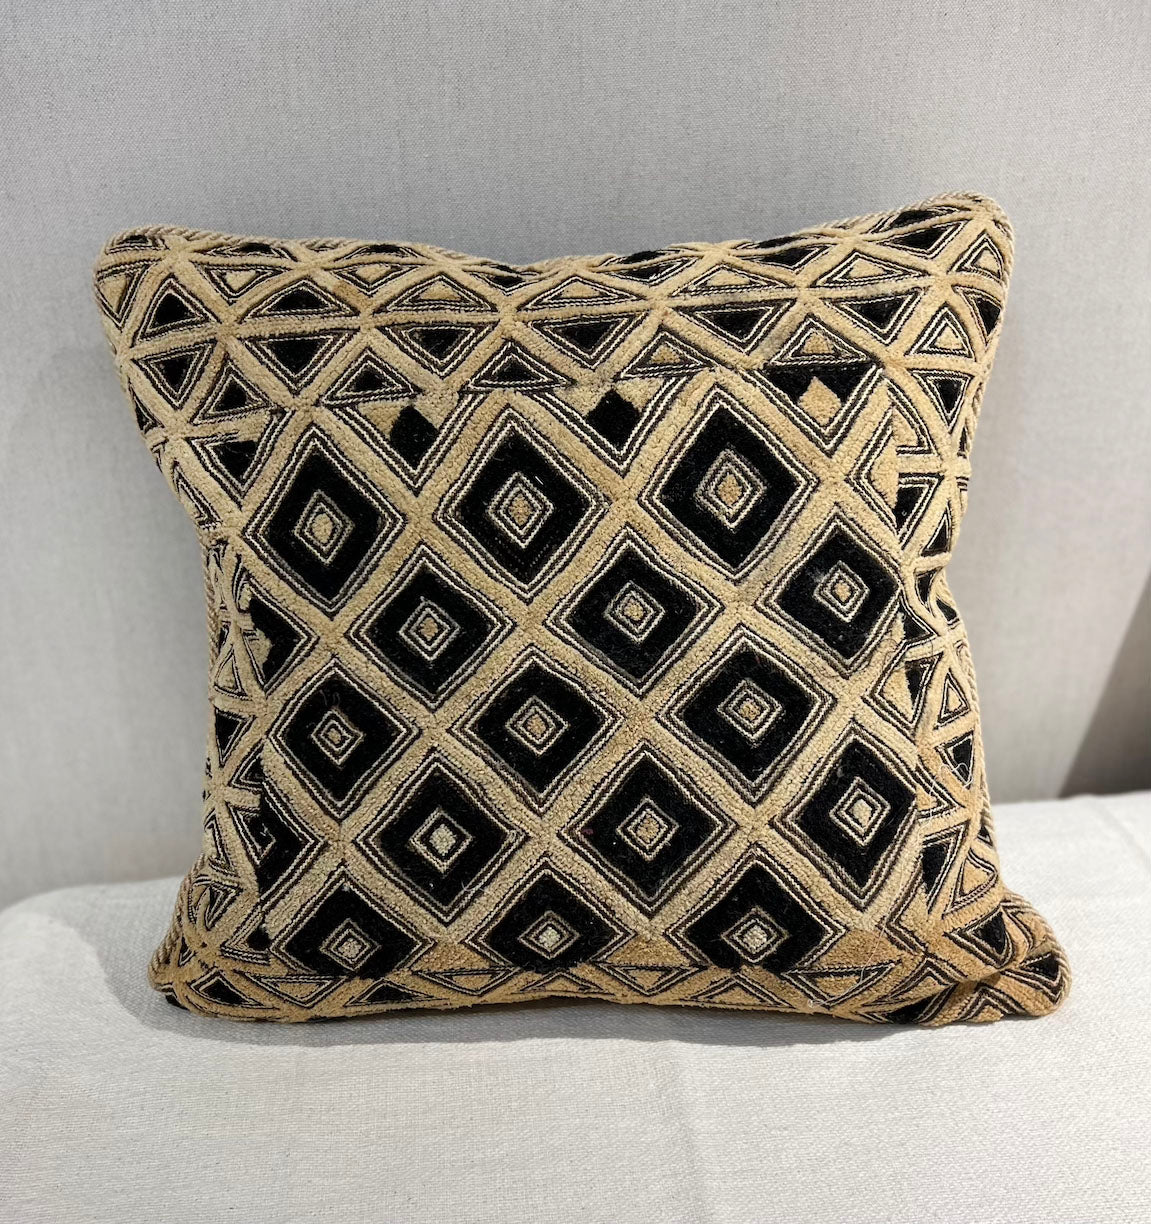 One-of-a-kind Kuba Cloth pillows from The Congo